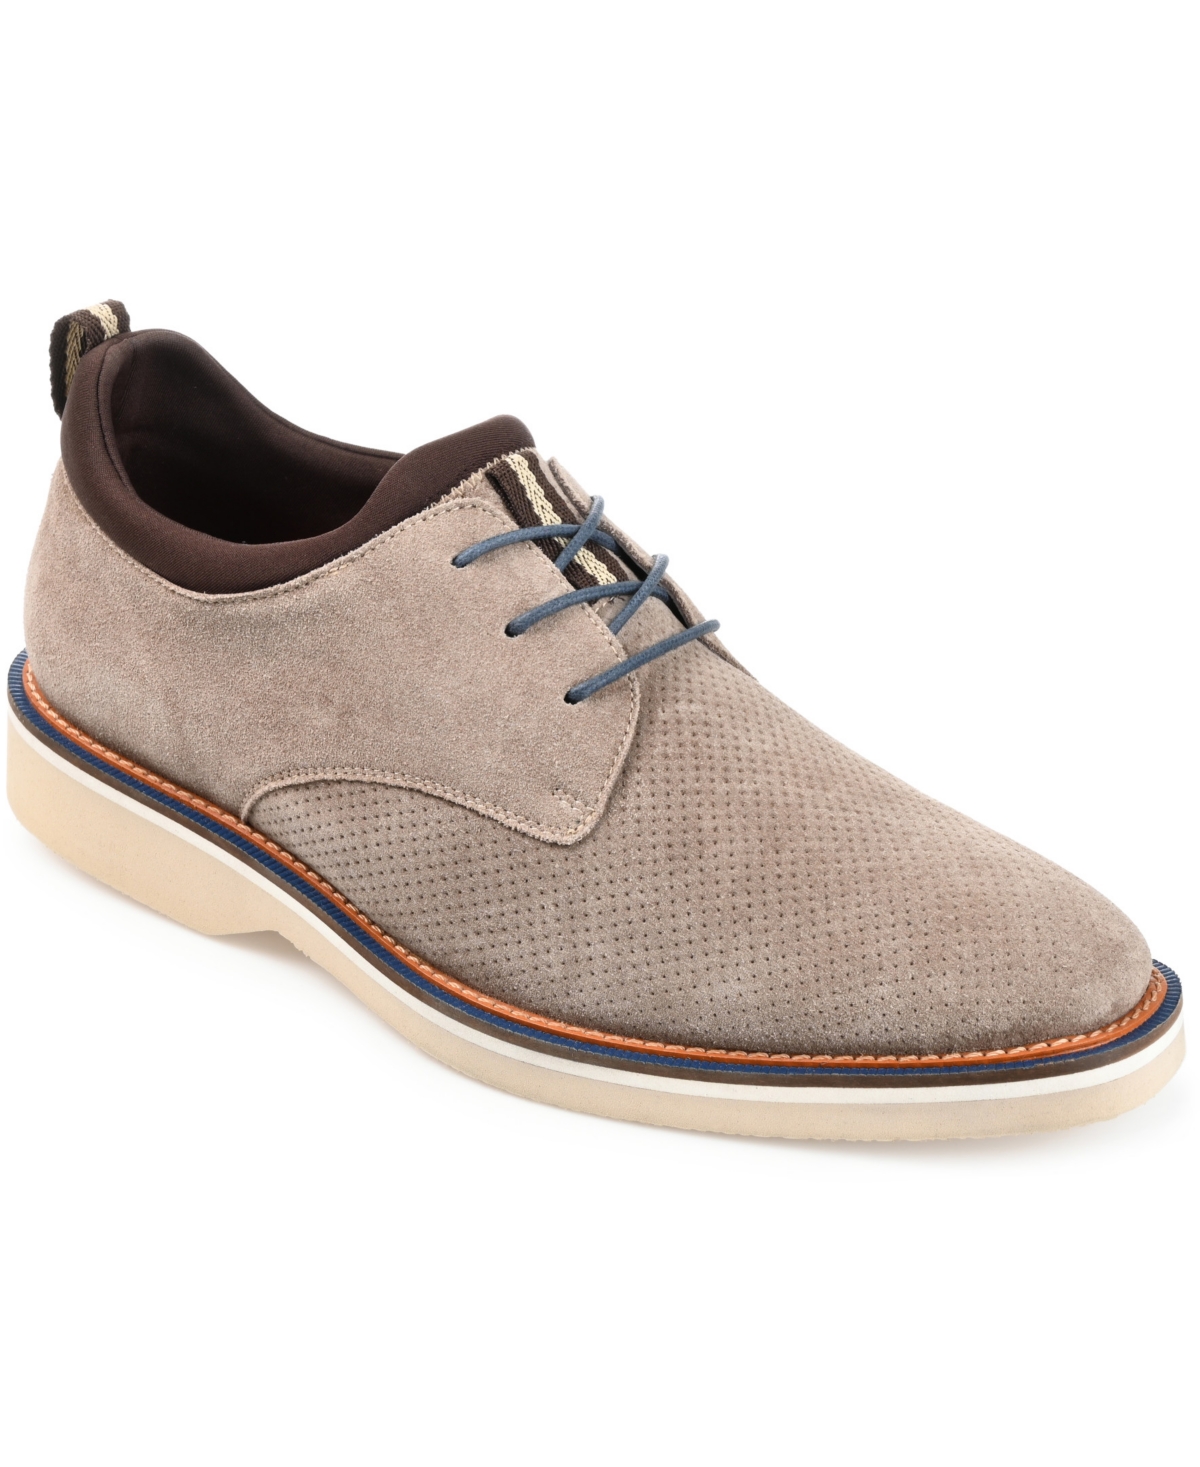 Men's Desmond Perforated Derby Dress Shoes - Taupe